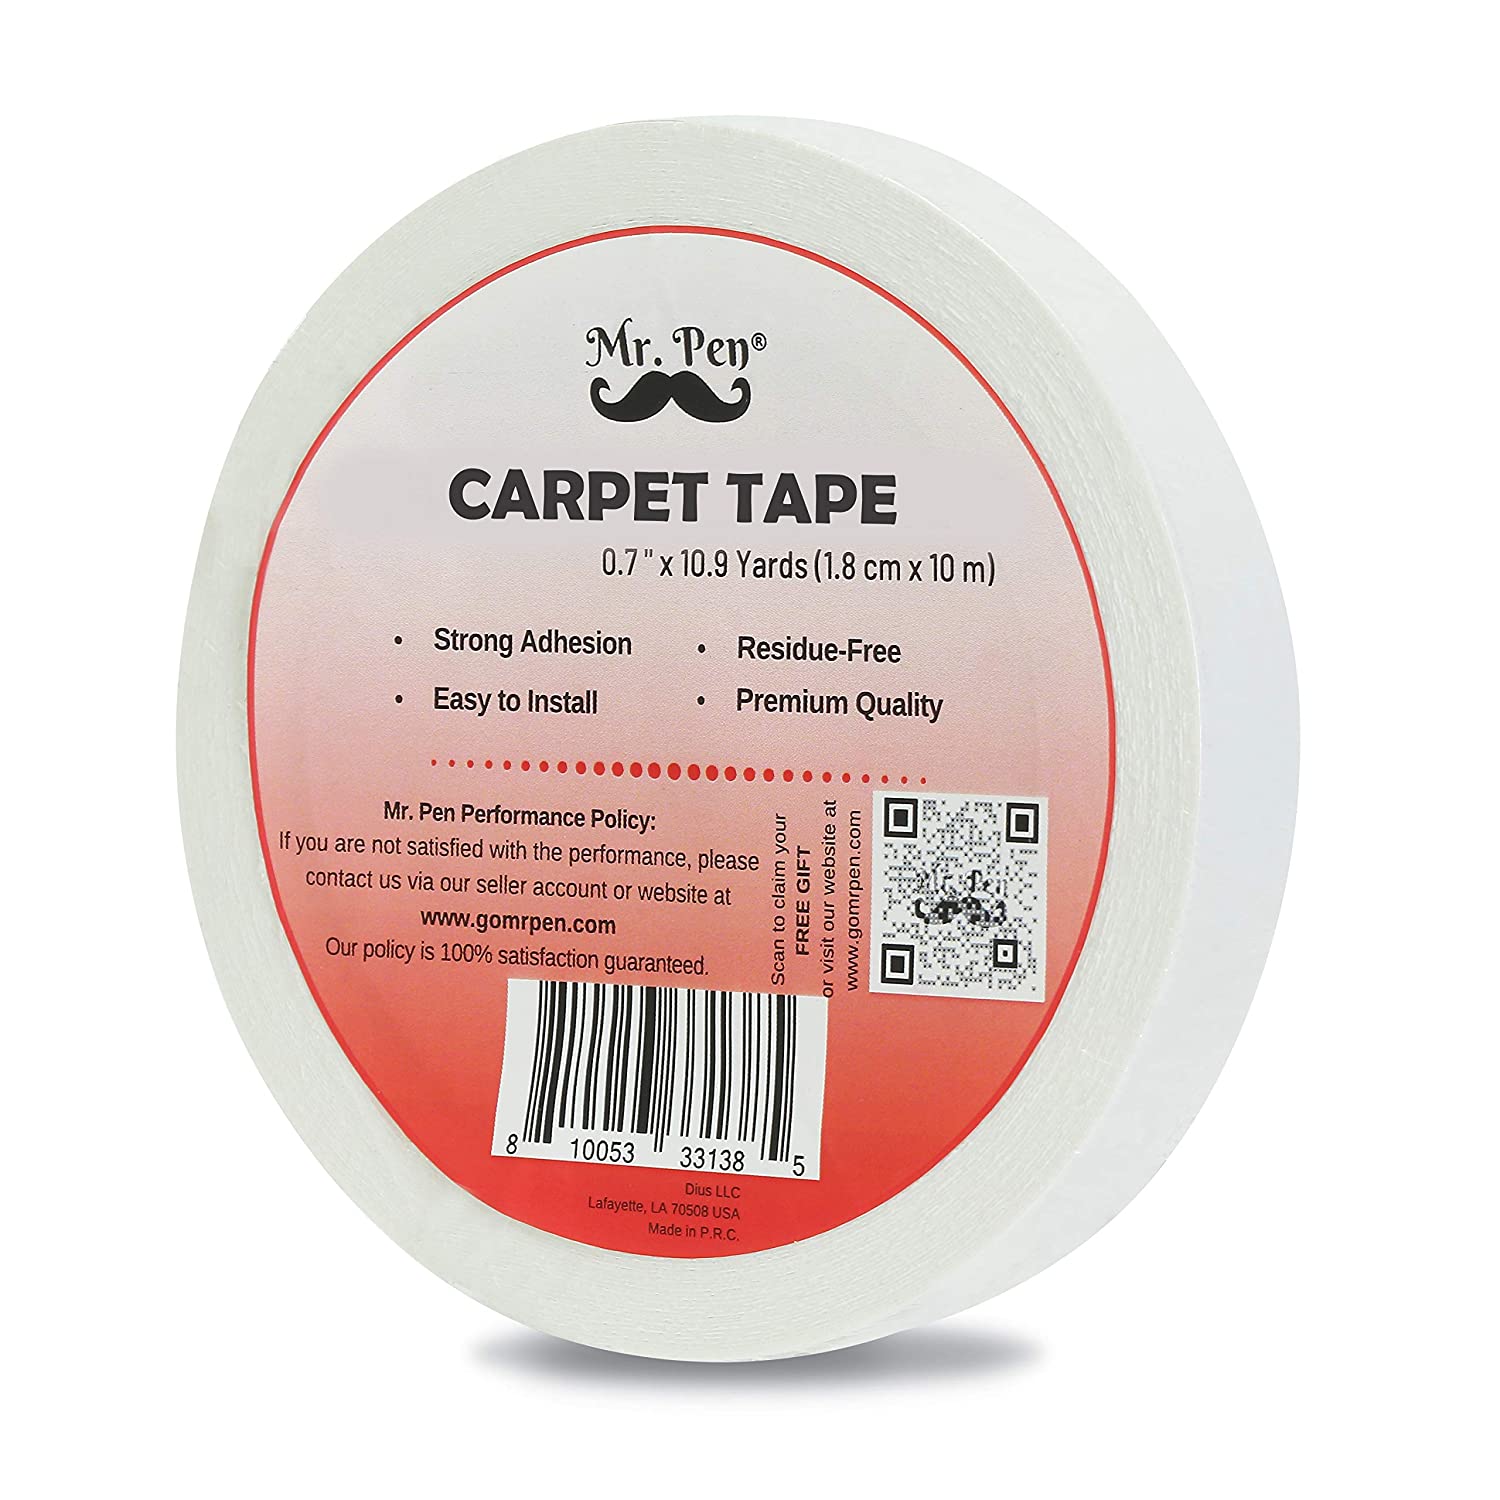 Mr. Pen- Double Sided Carpet Tape 10.9 yds (Free Prime Shipping) $1.99